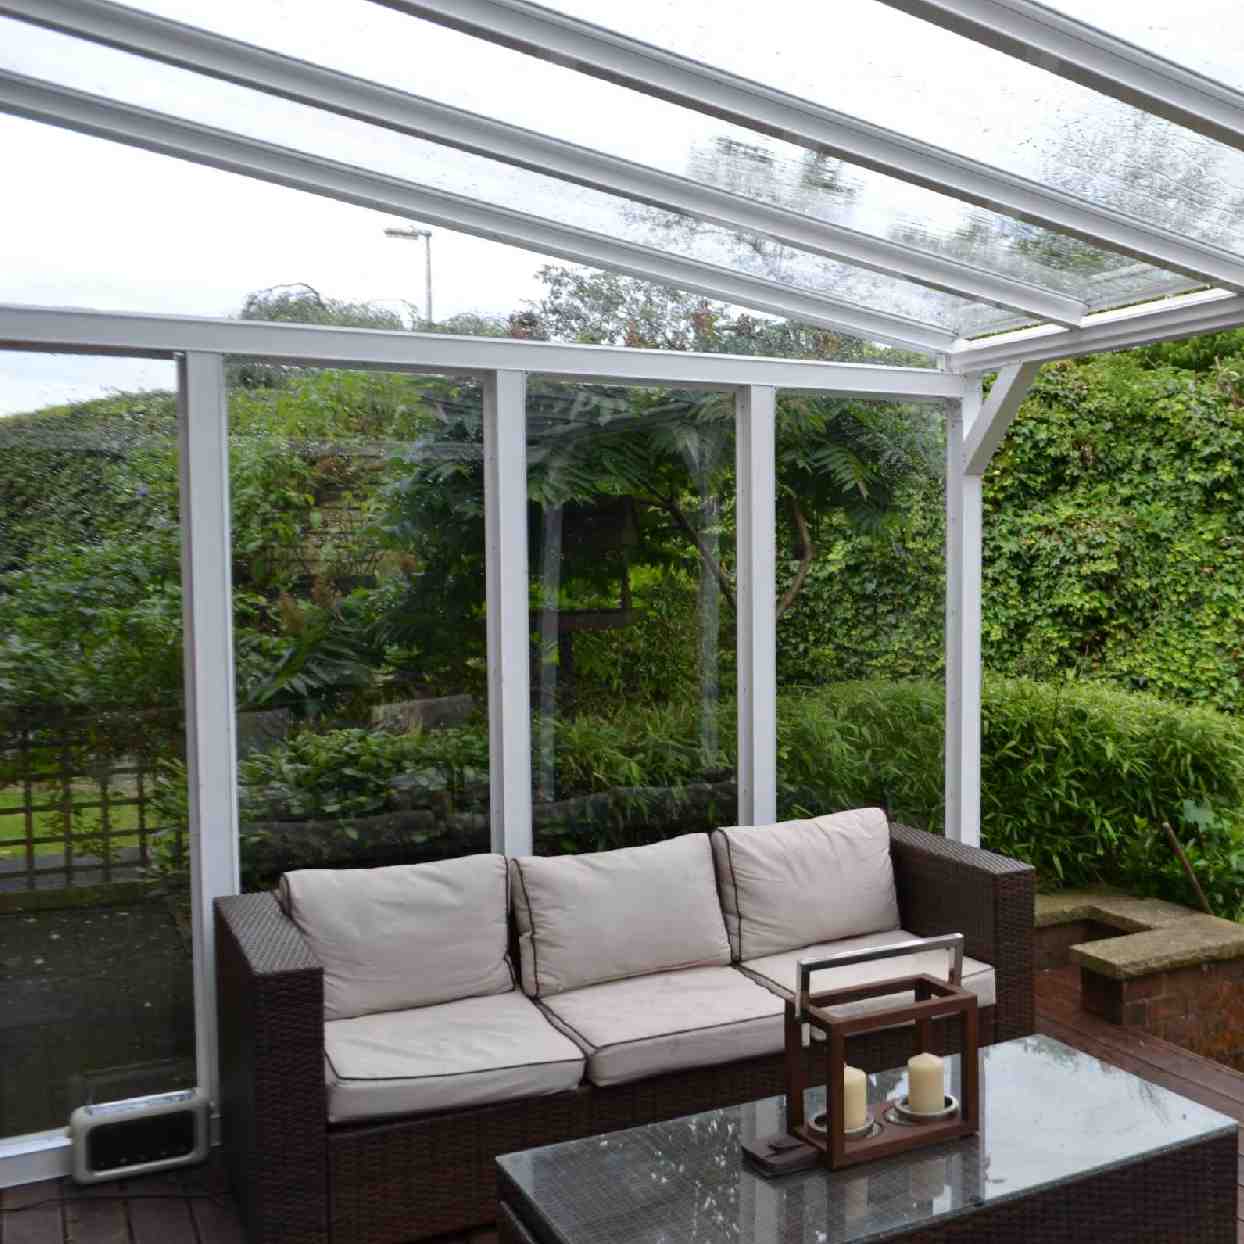 Buy Omega Verandah White with 6mm Glass Clear Plate Polycarbonate Glazing - 7.0m (W) x 1.5m (P), (4) Supporting Posts online today